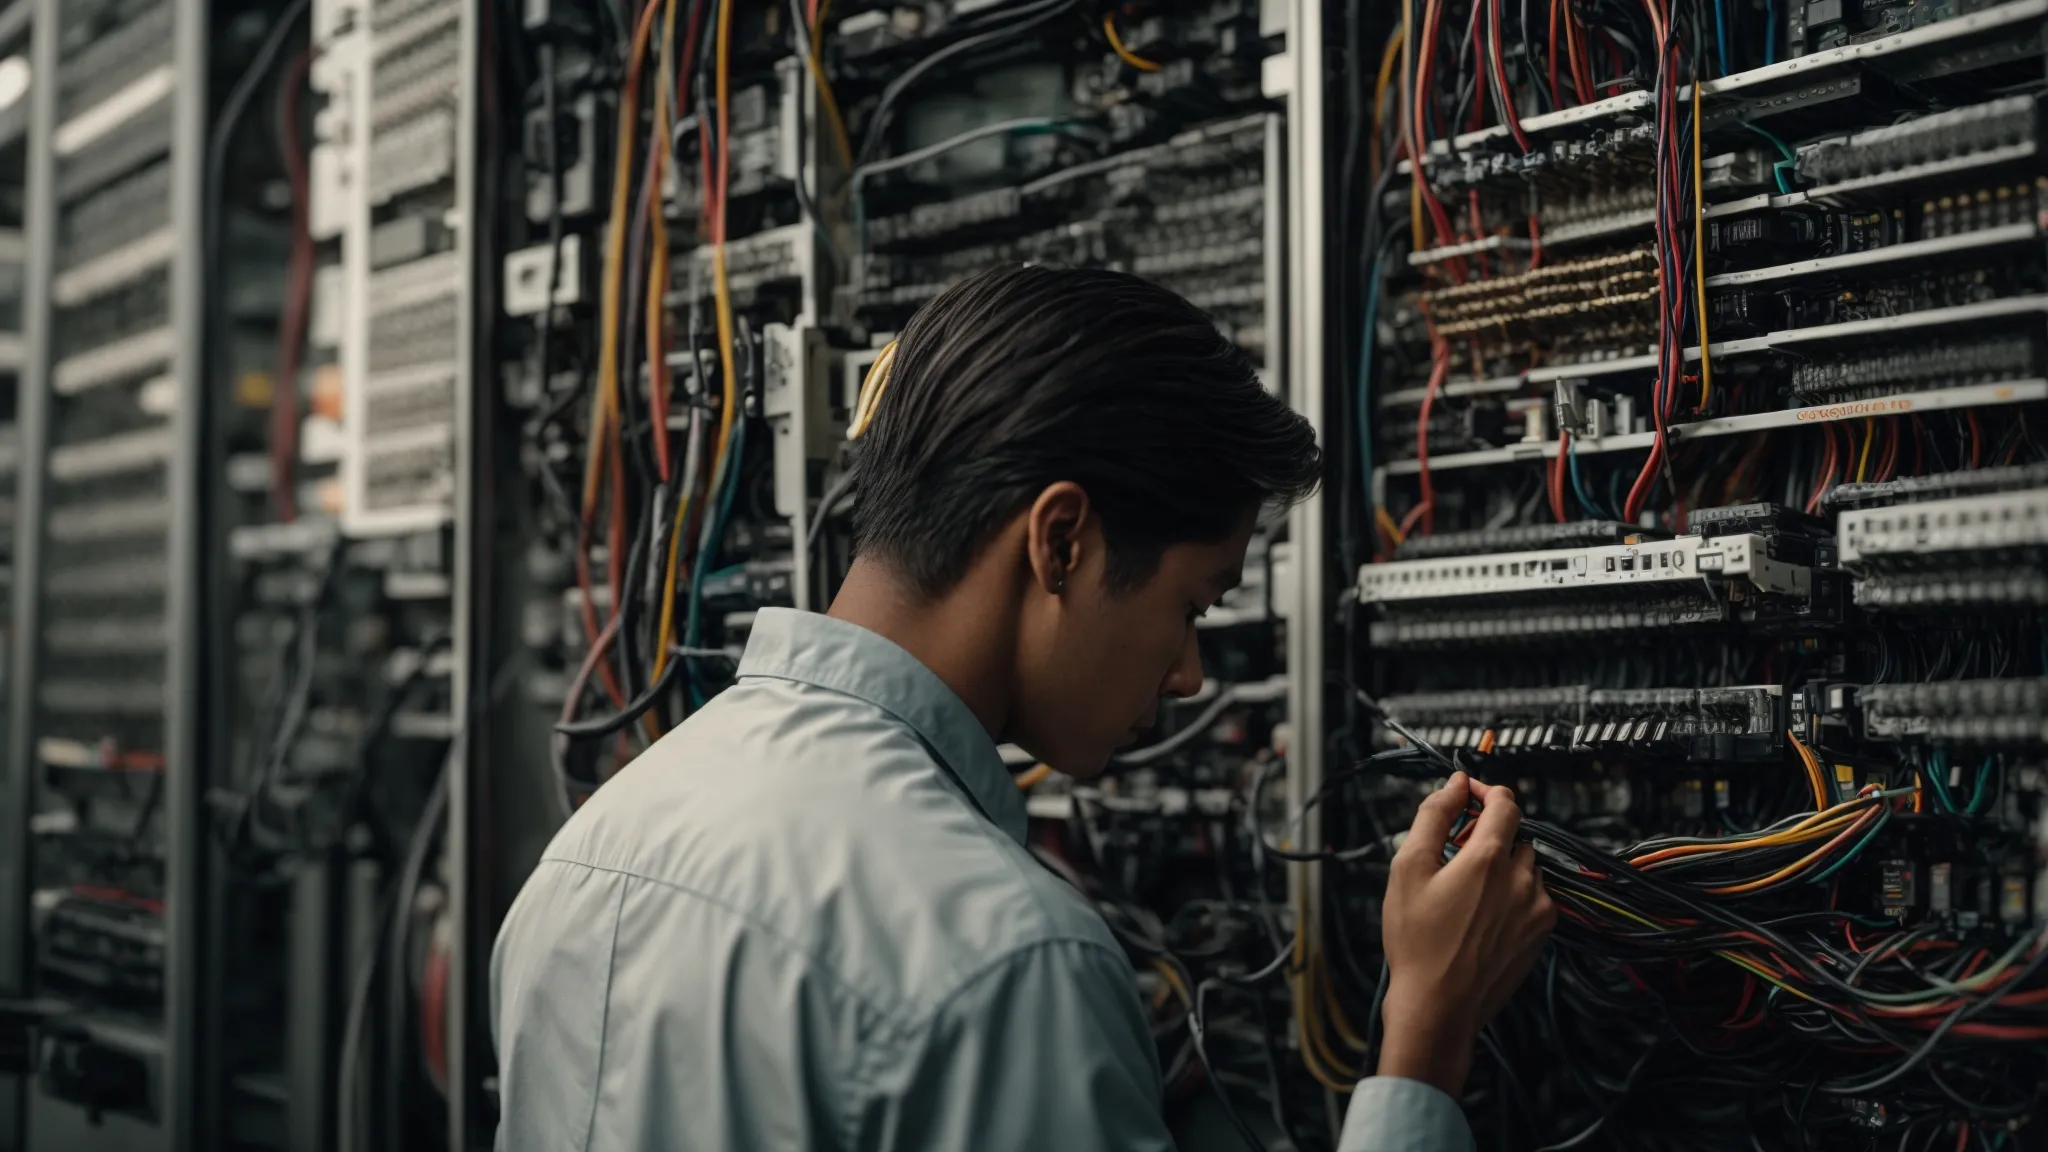 a person examines a complex wiring panel, methodically tracing and resolving connection issues.